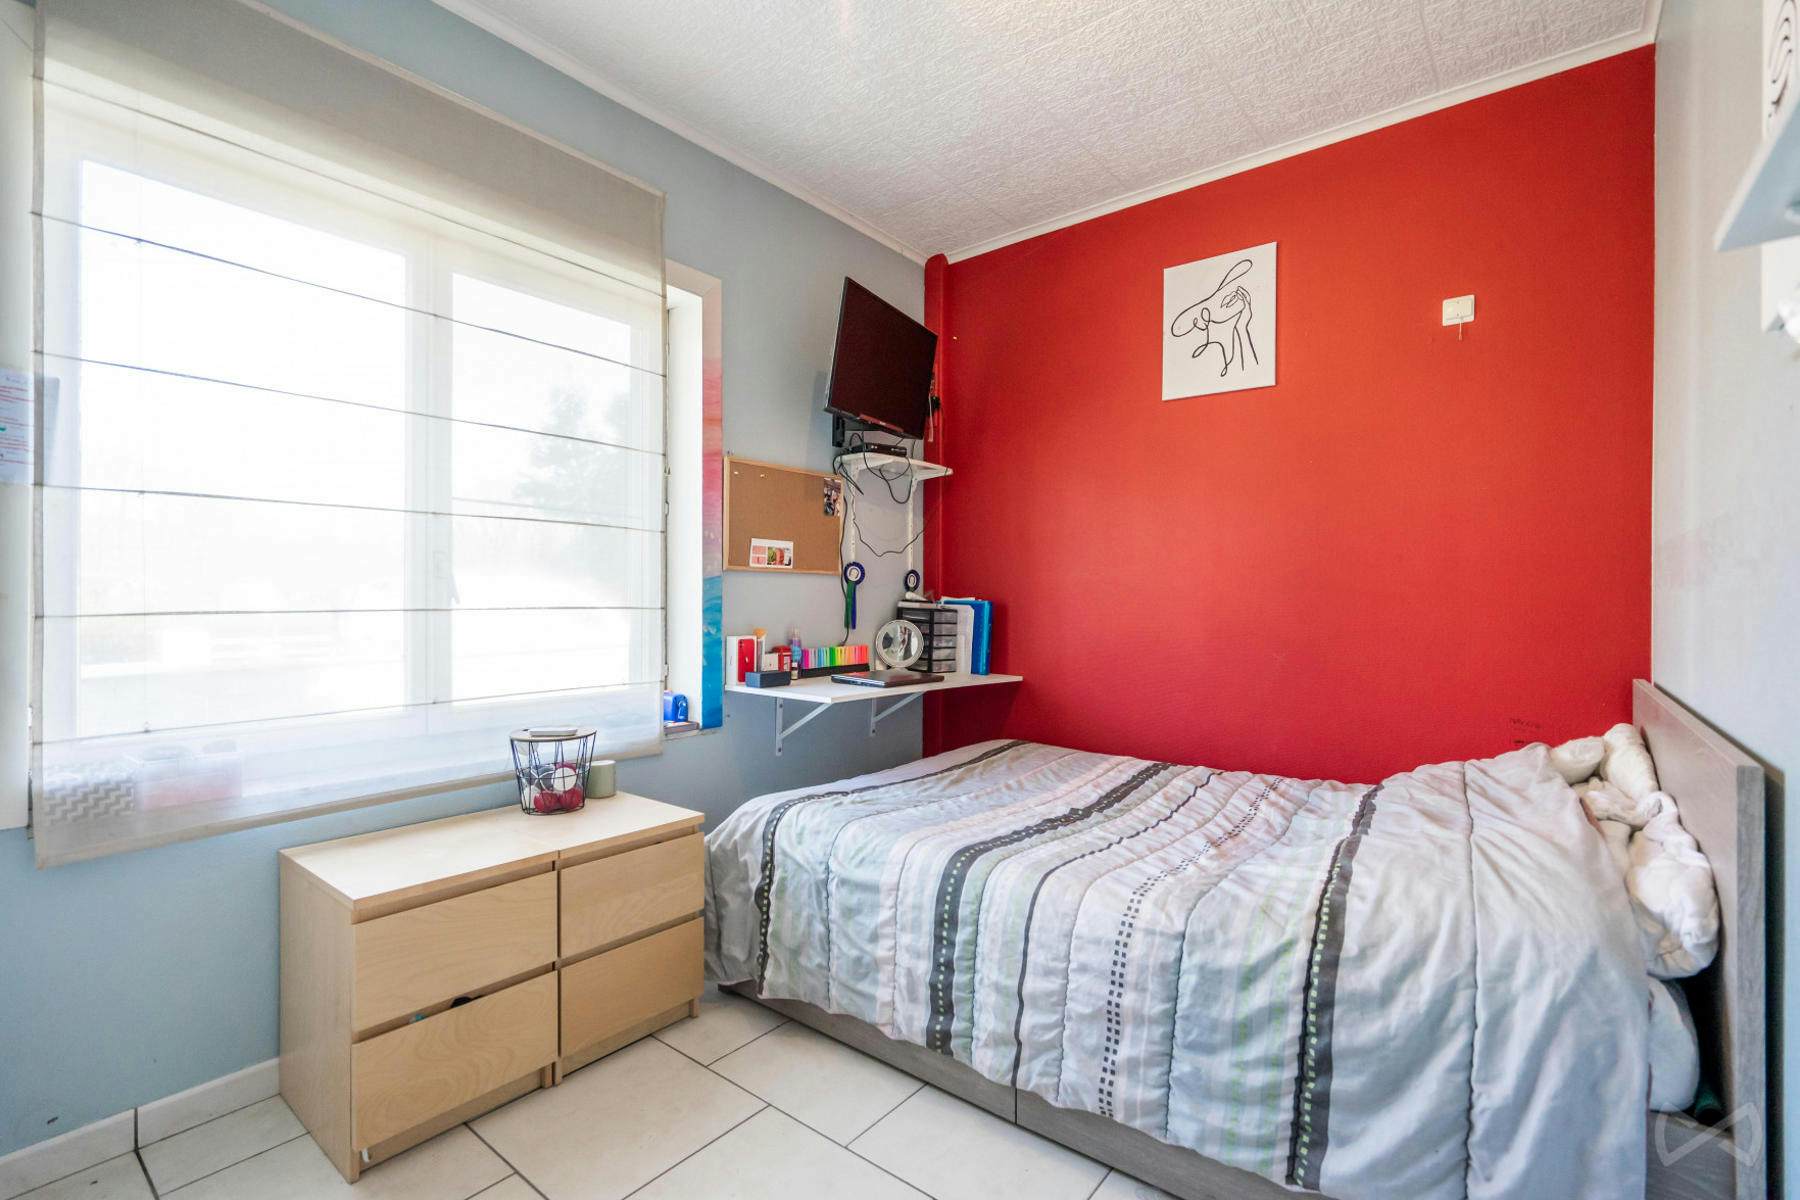 Picture 1 of 4 for Villa with two bedrooms in Court-saint-Étienne